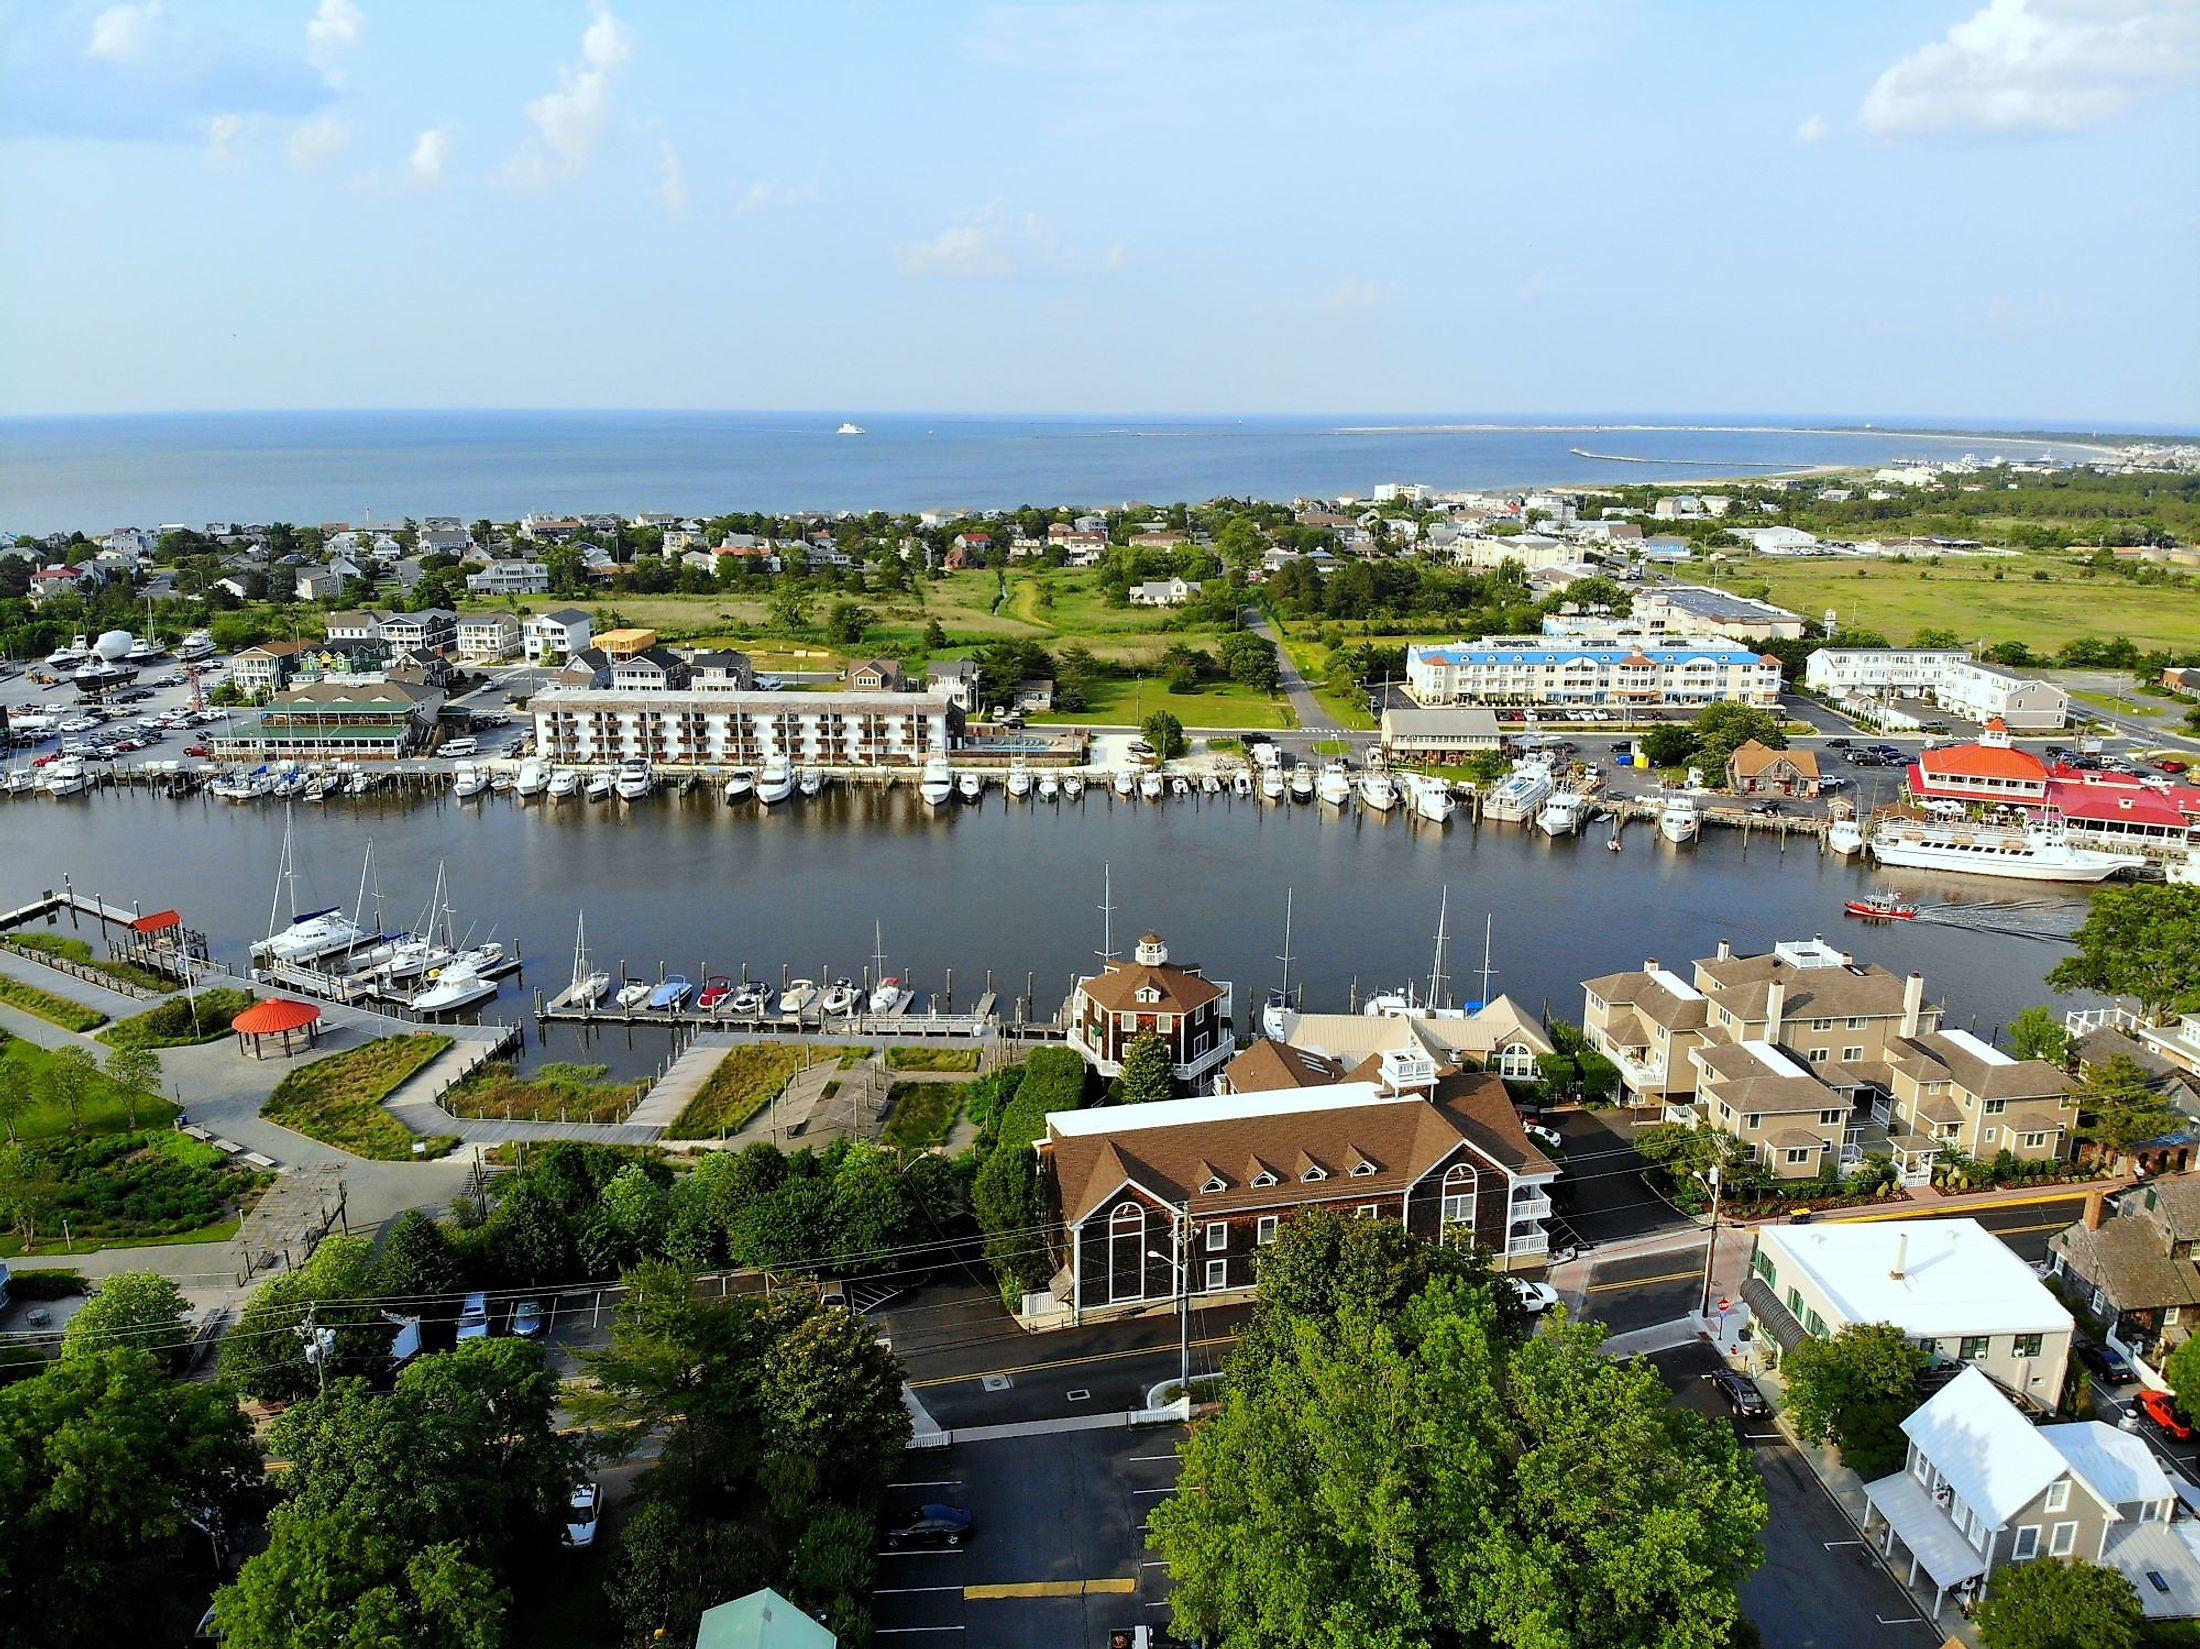 The aerial view of the beach town, fishing port, and waterfront residential homes along the canal in Lewes, Delaware. Editorial credit: Khairil Azhar Junos / Shutterstock.com